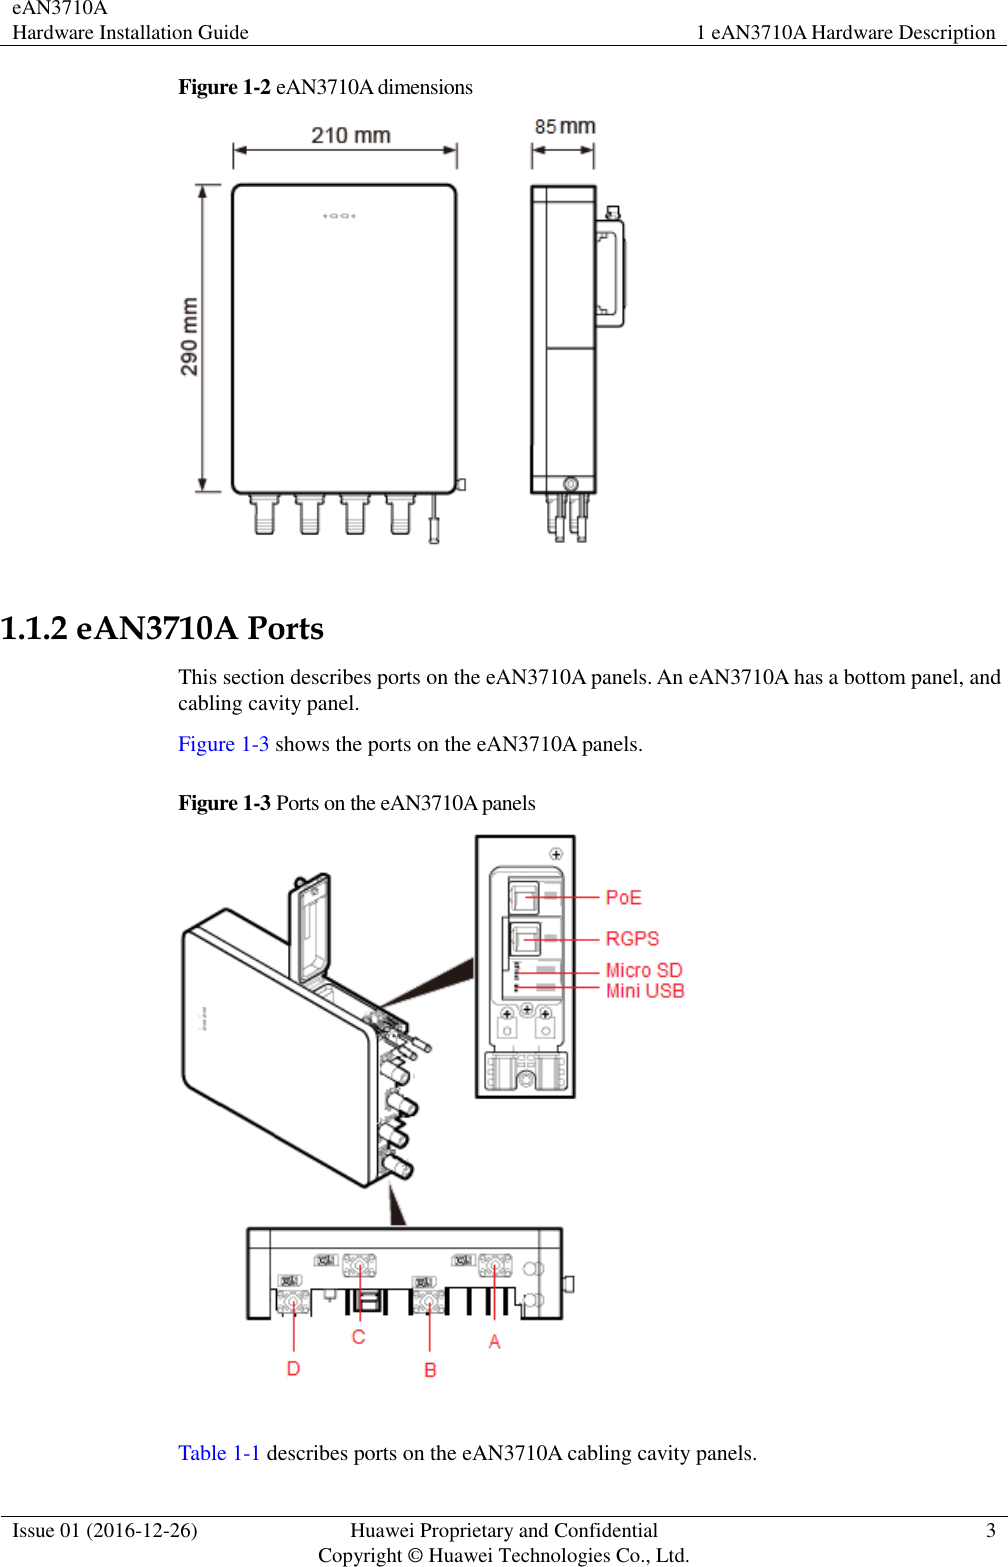 eAN3710A Hardware Installation Guide 1 eAN3710A Hardware Description  Issue 01 (2016-12-26) Huawei Proprietary and Confidential                                     Copyright © Huawei Technologies Co., Ltd. 3  Figure 1-2 eAN3710A dimensions   1.1.2 eAN3710A Ports This section describes ports on the eAN3710A panels. An eAN3710A has a bottom panel, and cabling cavity panel. Figure 1-3 shows the ports on the eAN3710A panels. Figure 1-3 Ports on the eAN3710A panels   Table 1-1 describes ports on the eAN3710A cabling cavity panels. 